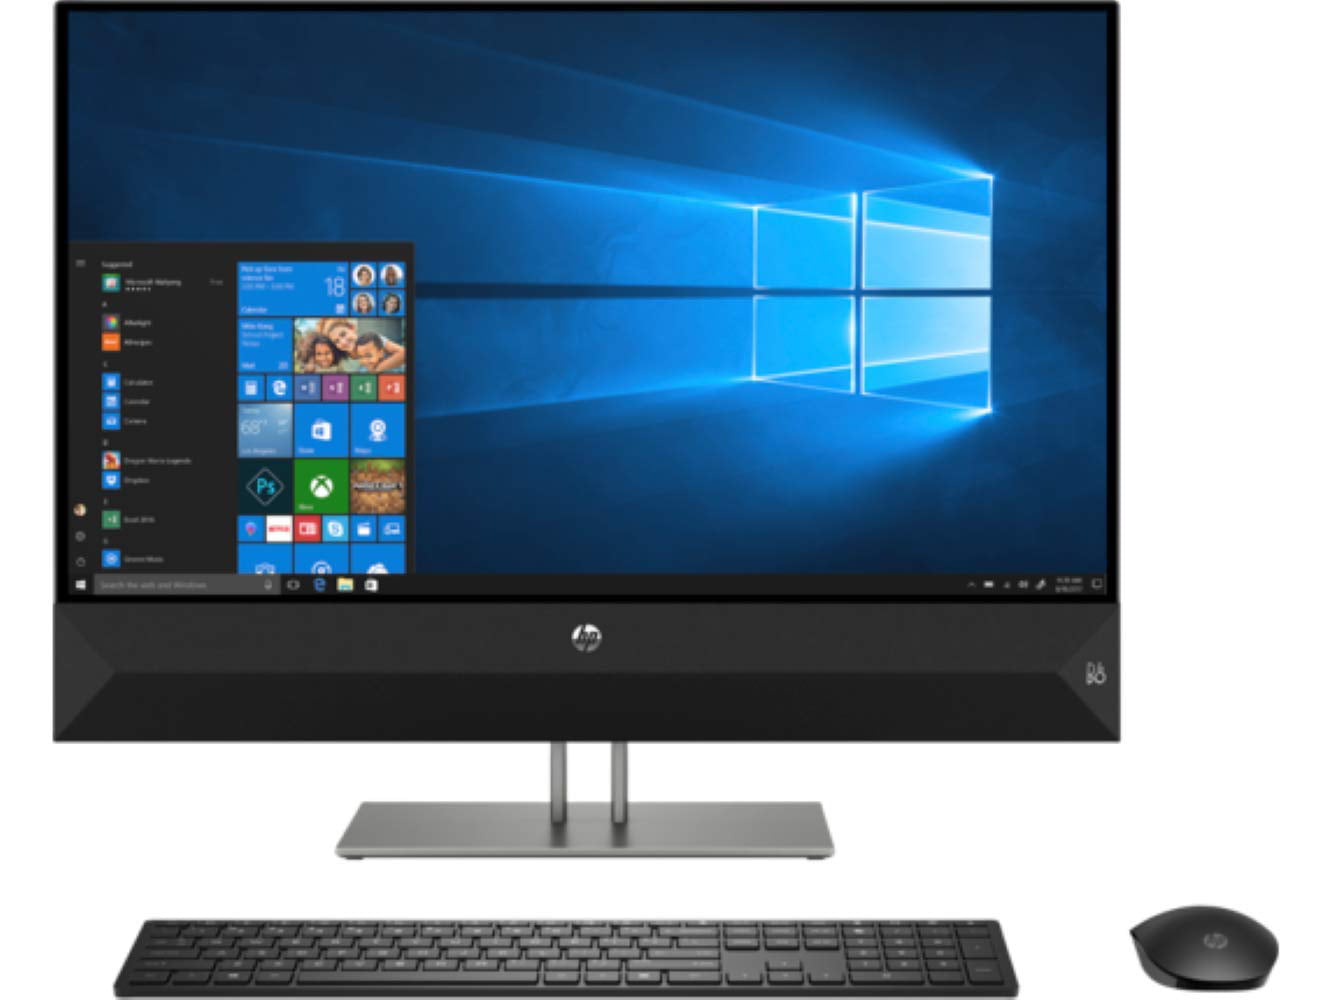 HP Pavilion 27st Premium 27 inch Touch All-in-One Desktop PC (Intel